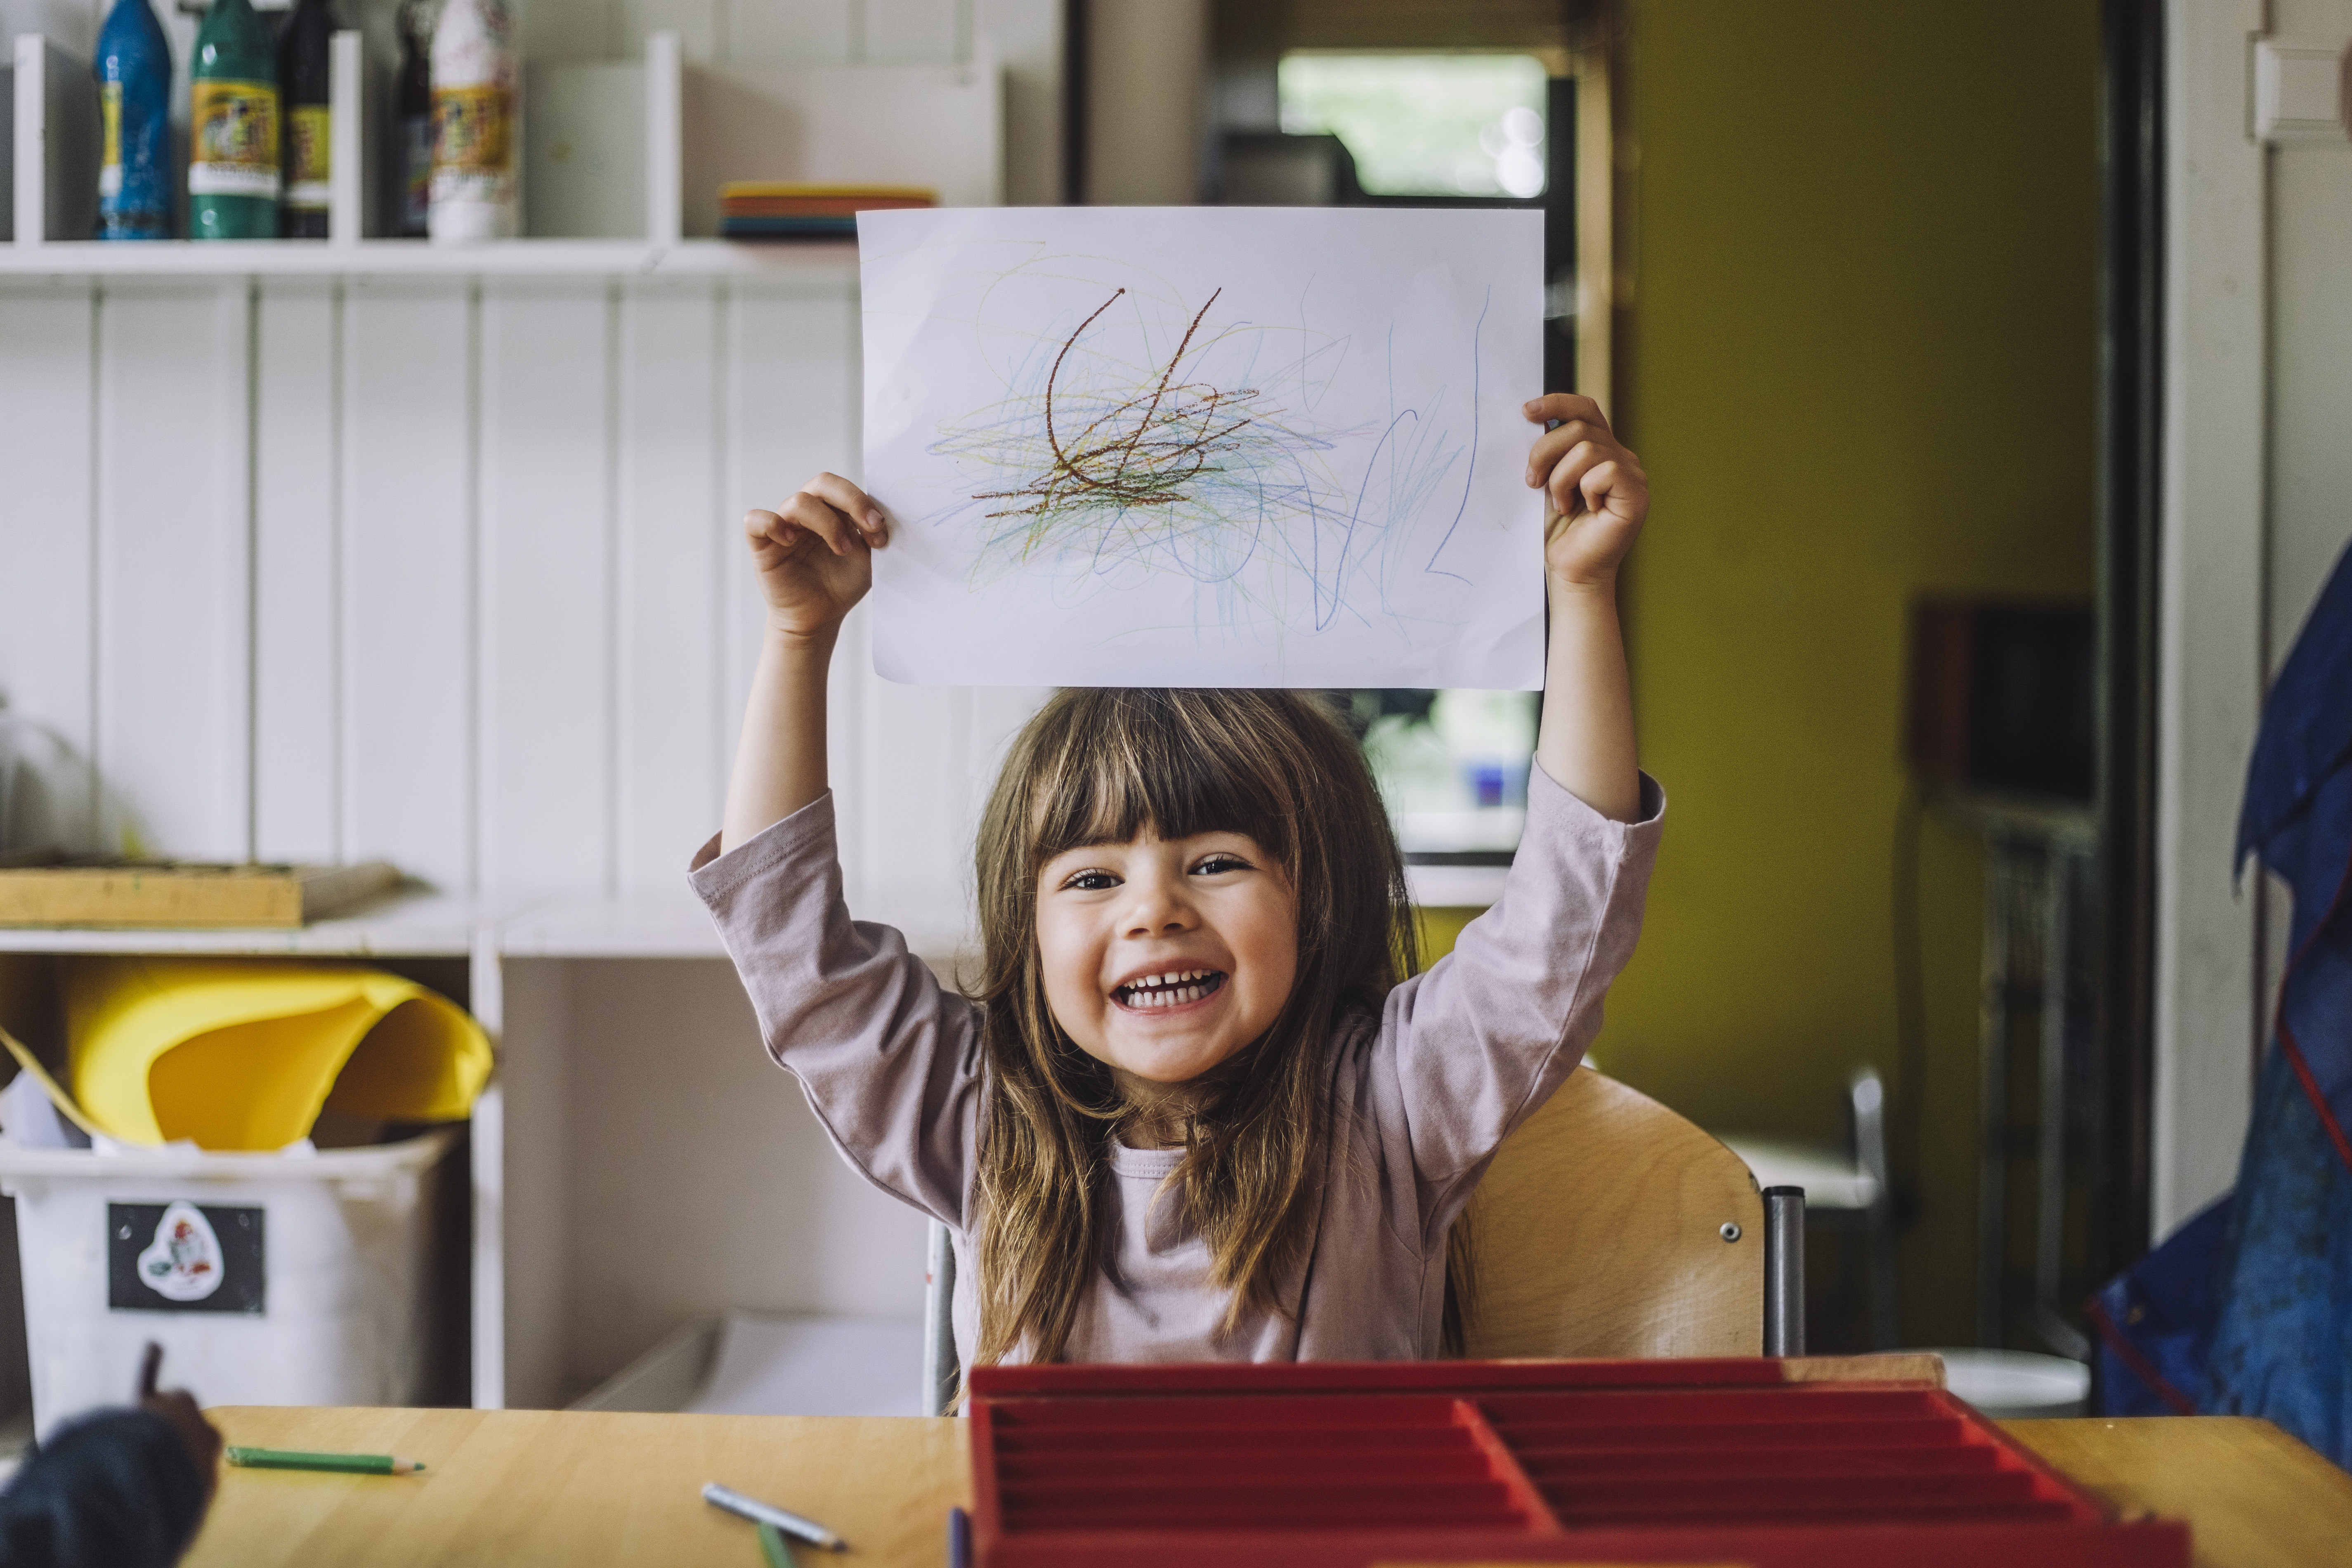 Happy little girl showing her colored pencil scribble on paper at kindergarten | Source: Getty Images